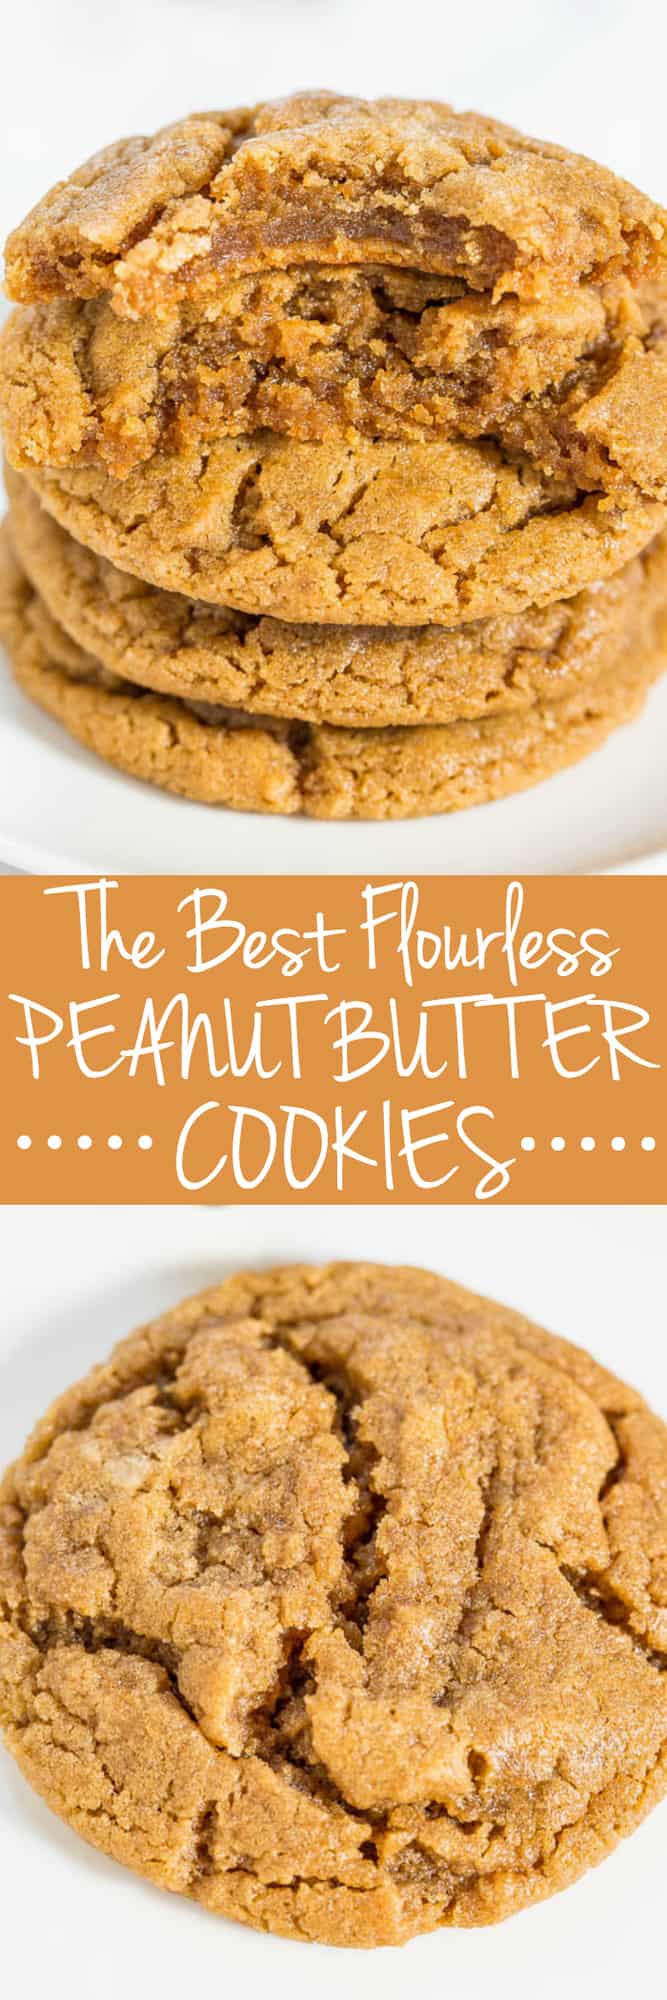 The Best Flourless Peanut Butter Cookies - Soft, chewy and they'll be your new fave PB cookies!! One bowl, no mixer, no butter, naturally gluten-free! Love it when something so easy tastes so amazing!!